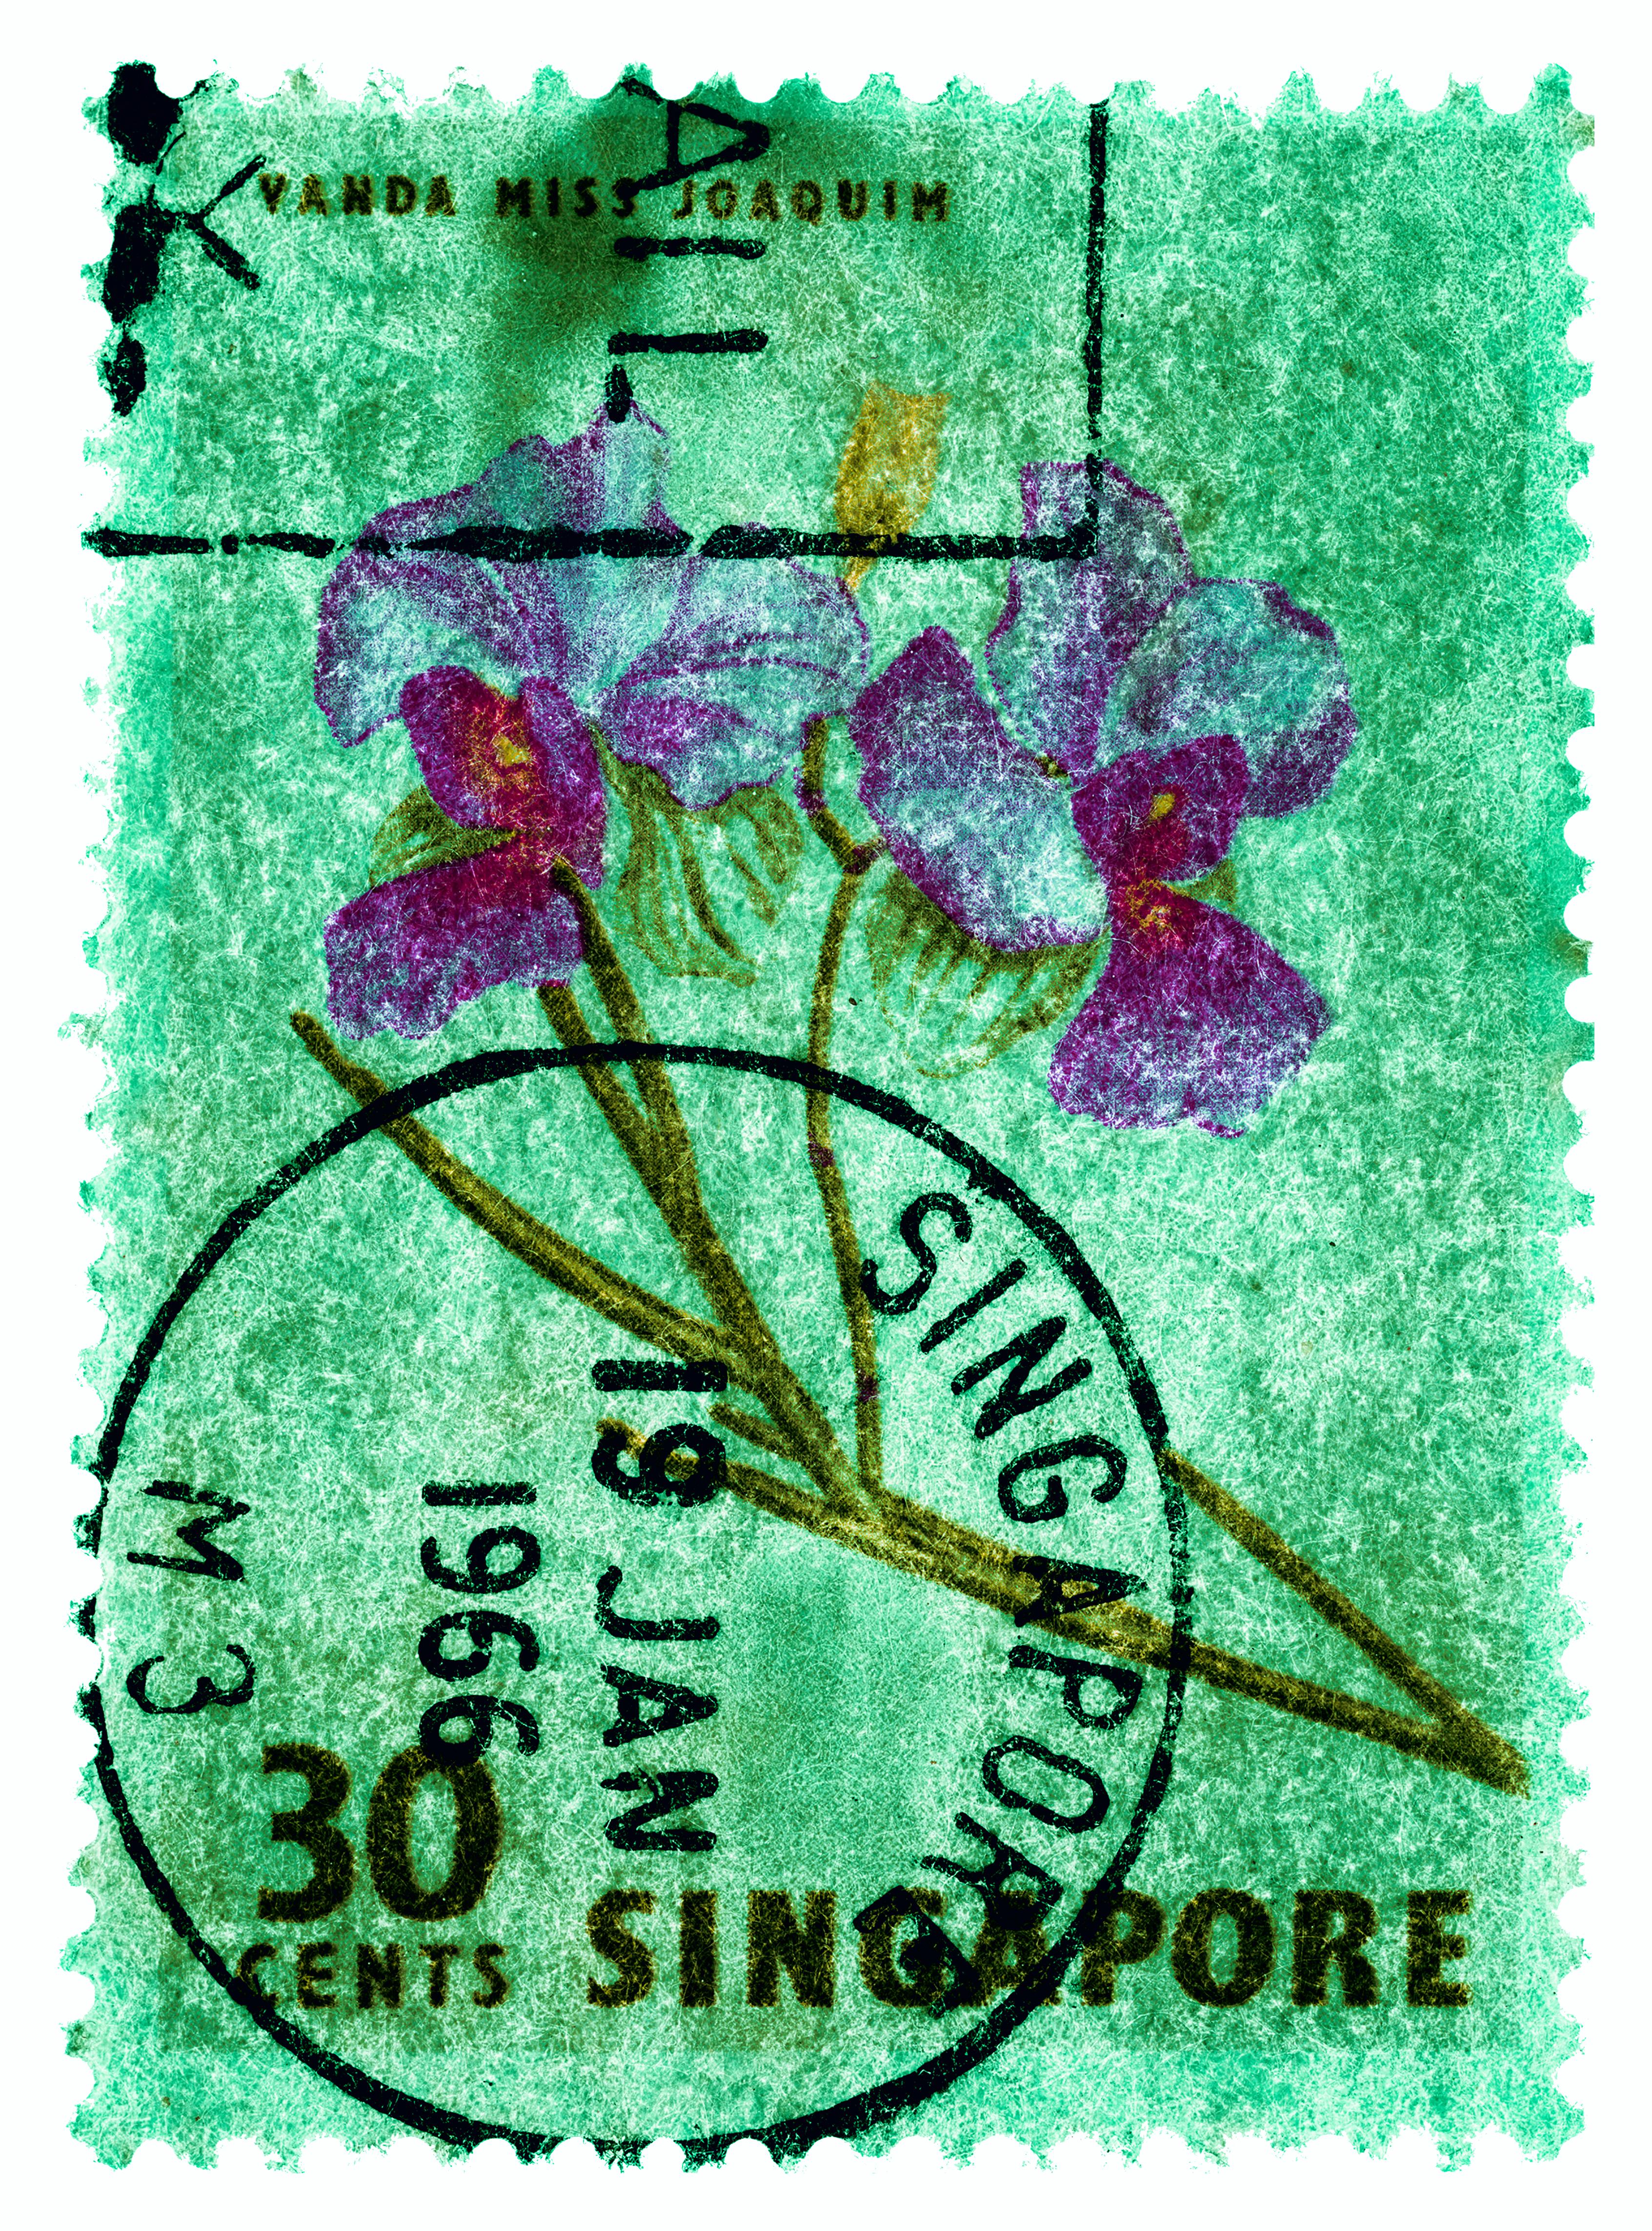 Heidler & Heeps Color Photograph - Singapore Stamp Collection, 30c Singapore Orchid Green - Floral color photo